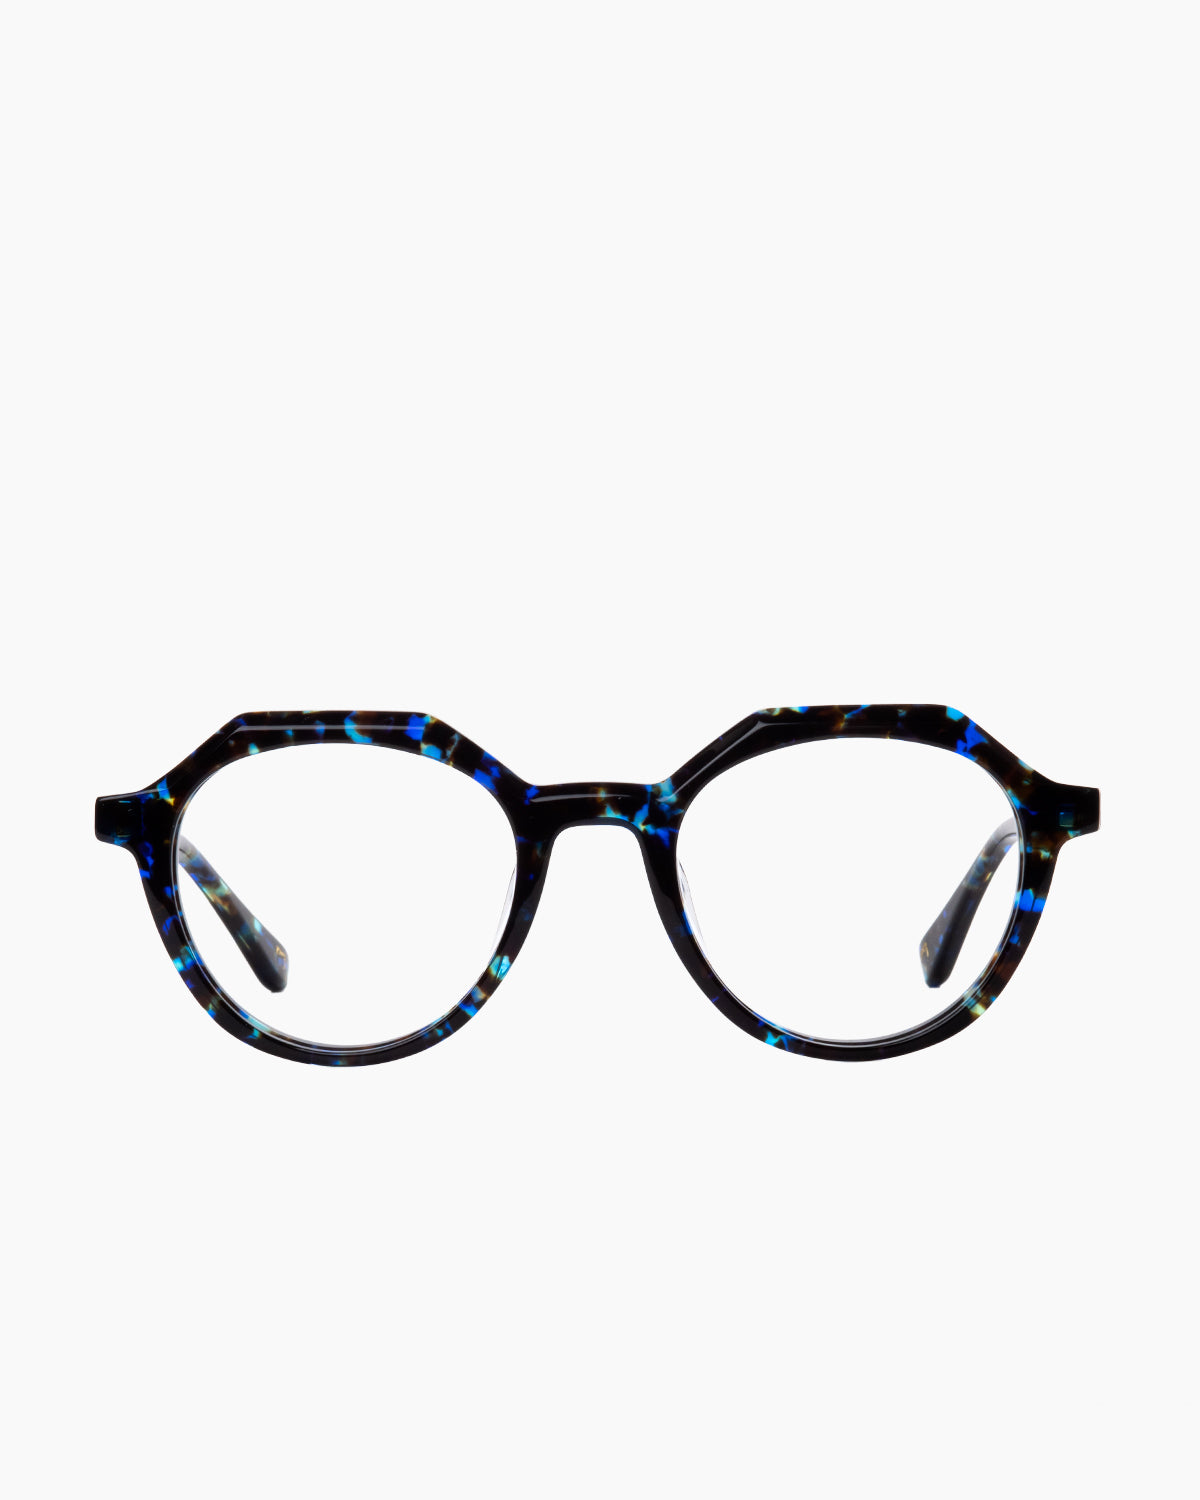 Spectacleeyeworks - Anita - c716 | Bar à lunettes:  Marie-Sophie Dion